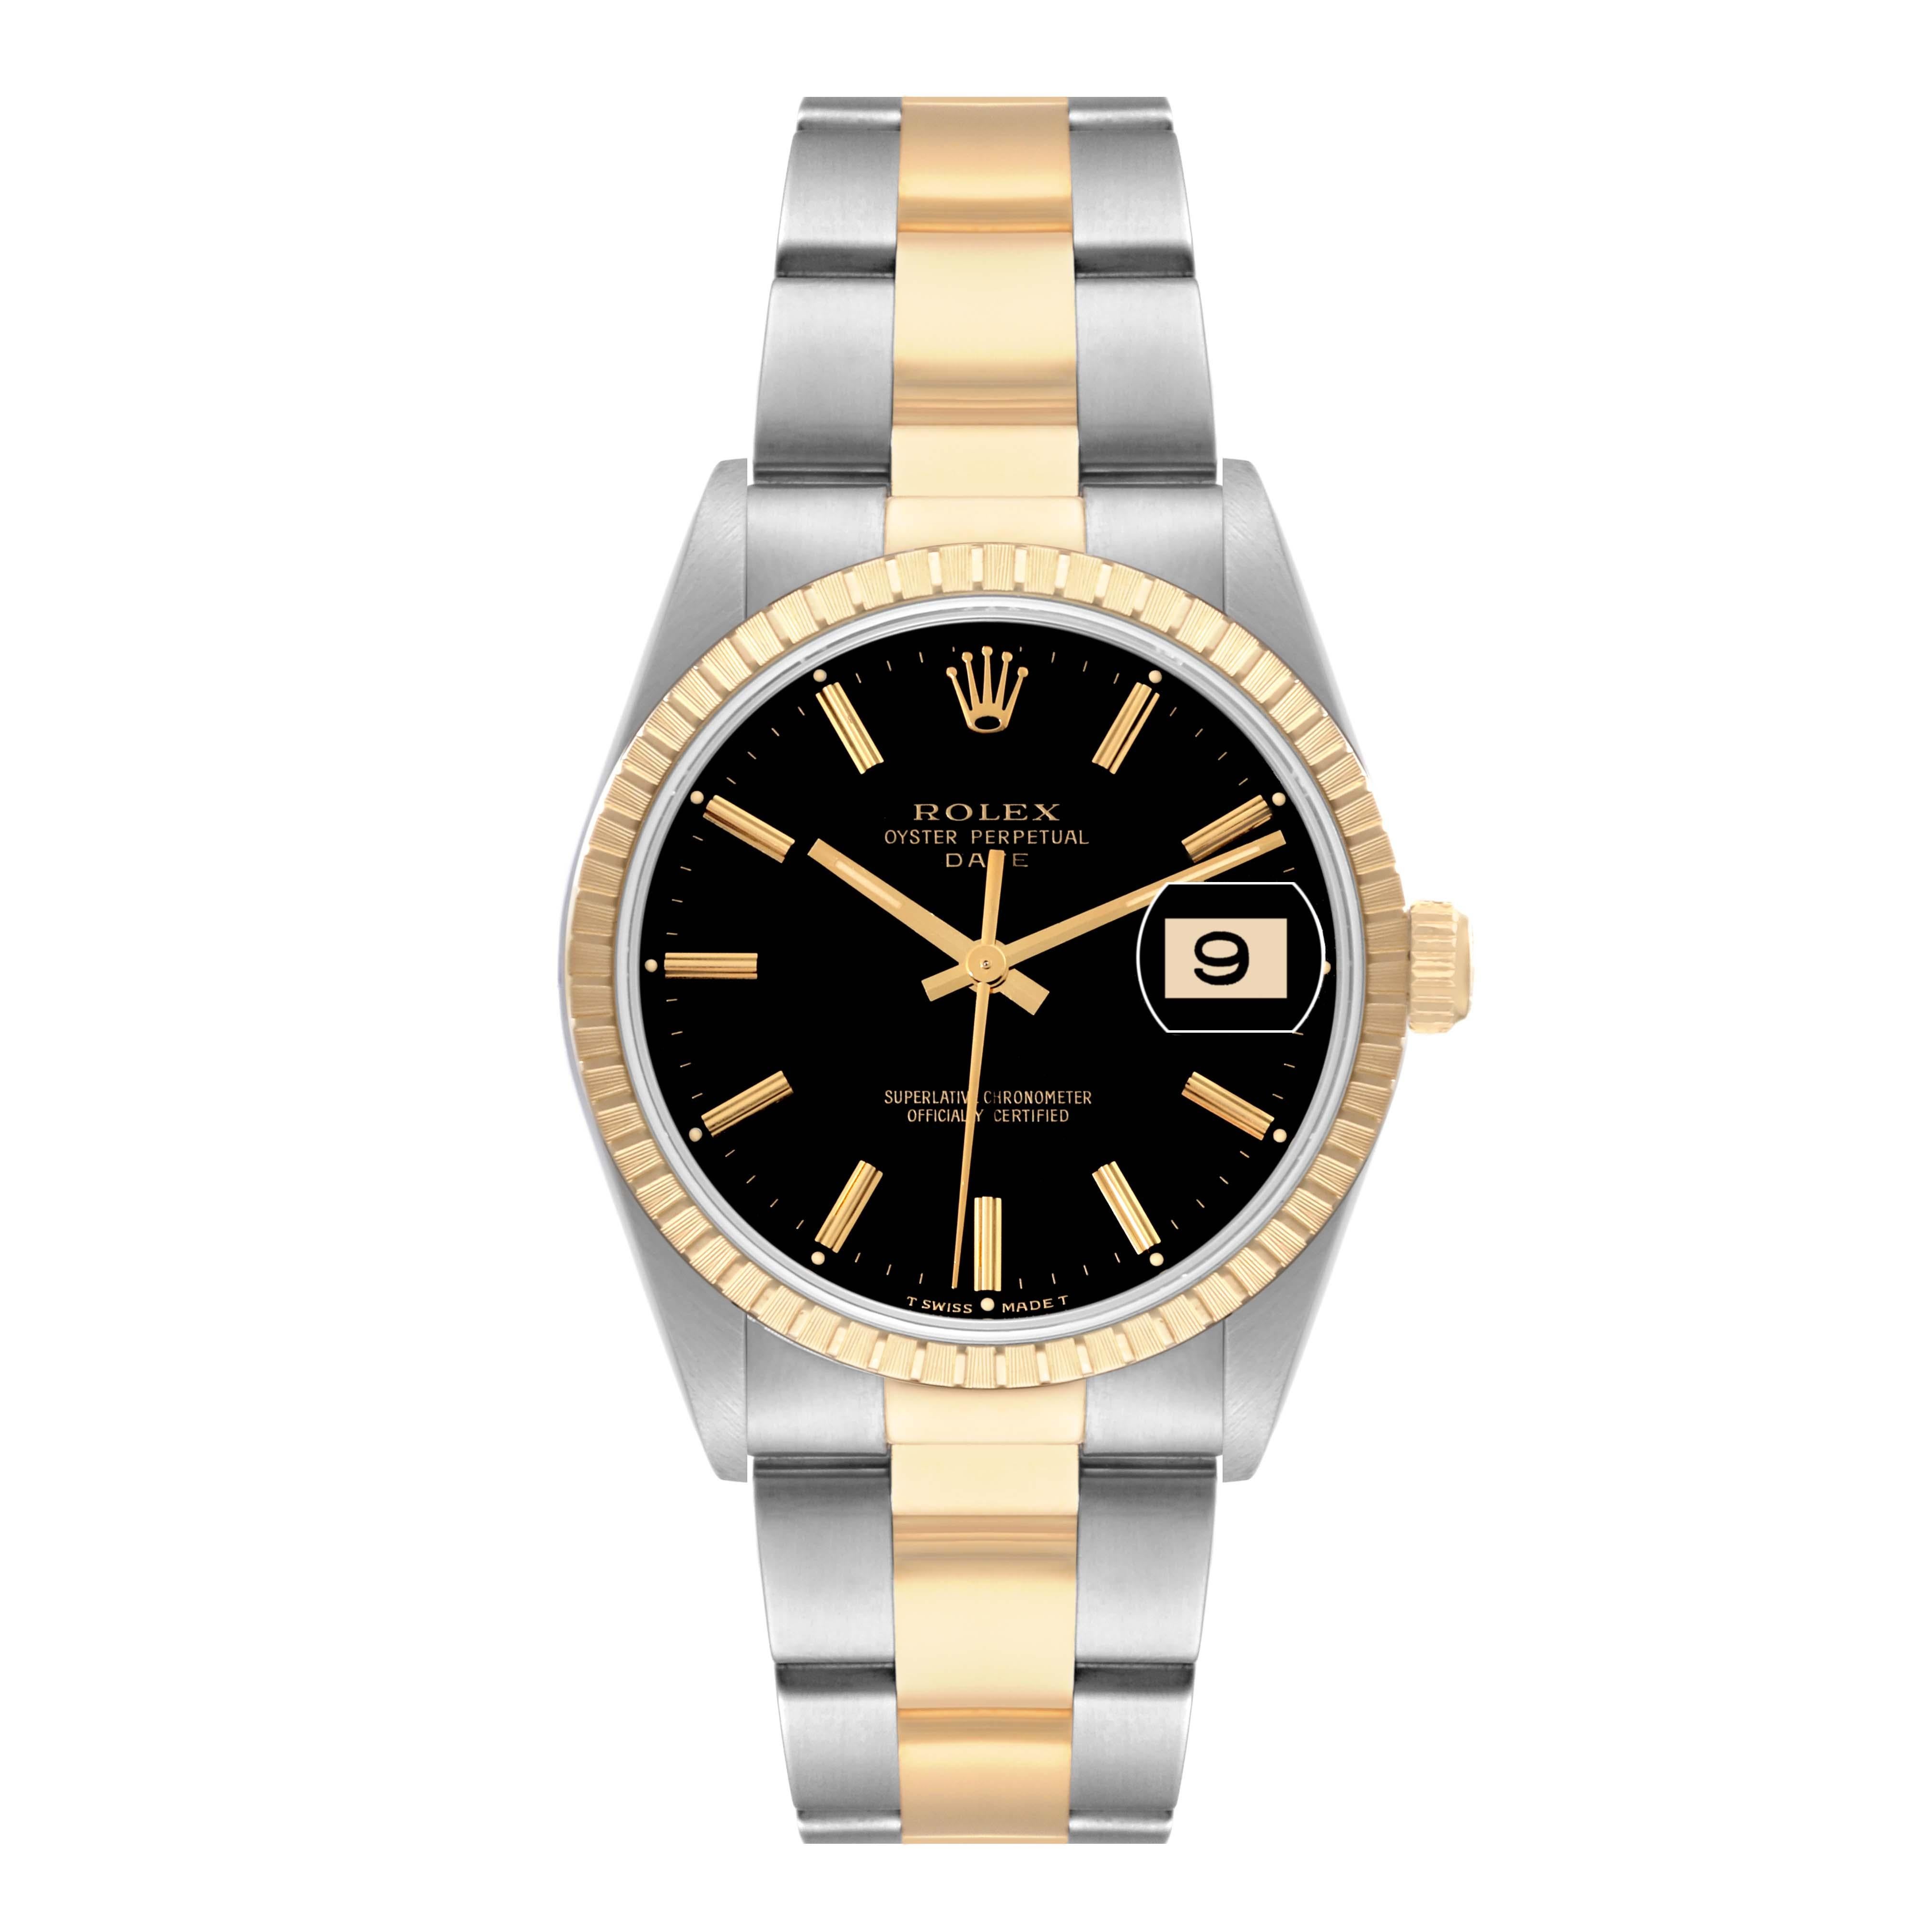 Rolex Date Steel Yellow Gold Black Dial Mens Watch 15223 Box Papers. Officially certified chronometer automatic self-winding movement. Stainless steel and 18K yellow gold oyster case 34.0 mm in diameter. Rolex logo on the crown. 18K yellow gold